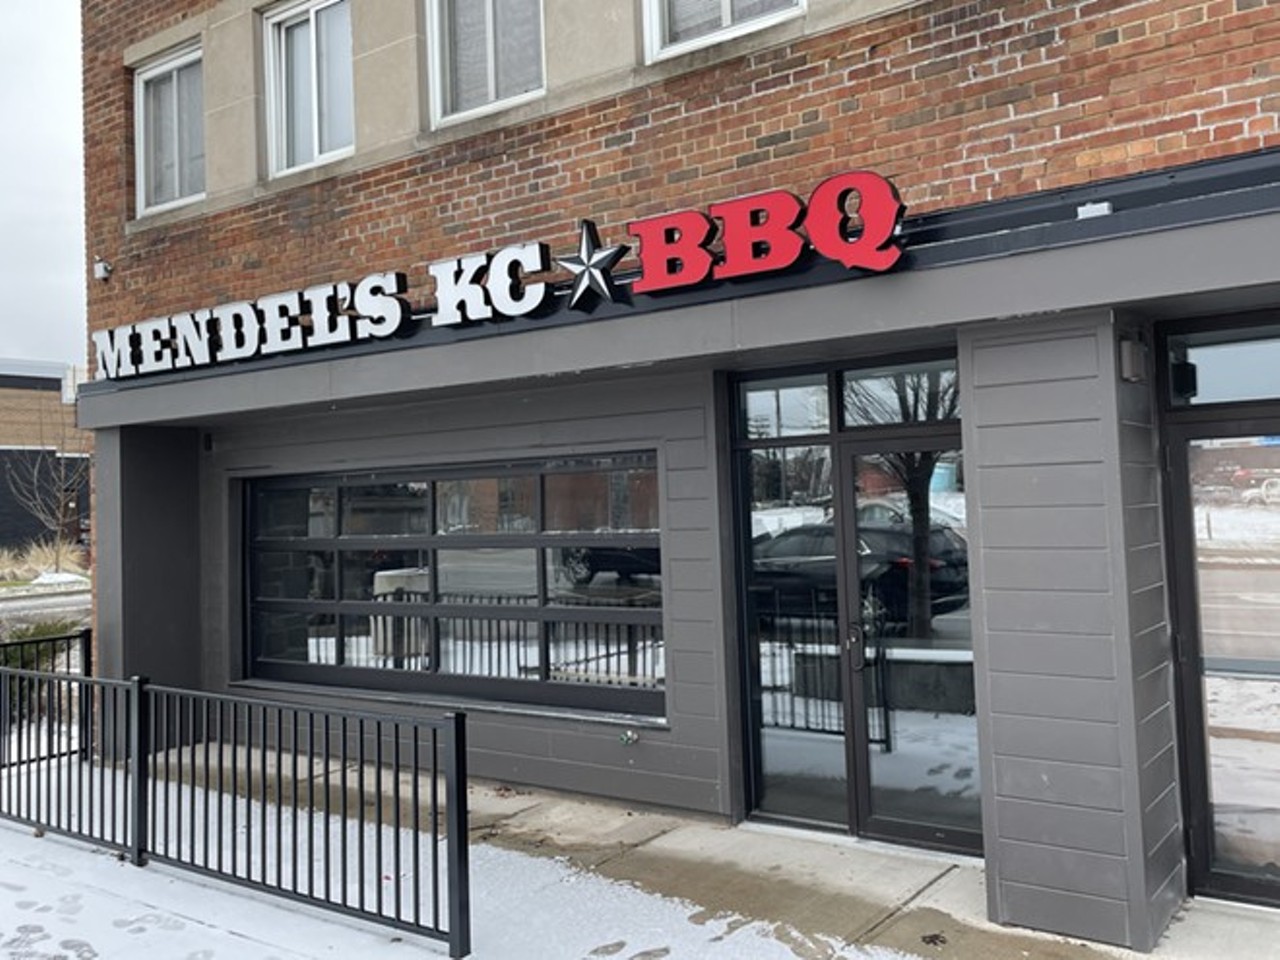  Mendel’s Kansas City BBQ
20314 Chagrin Blvd., Shaker Heights
Mendel Segal, who is known to his many fans as the “rabbi pitmaster,” at his barbecue restaurant in Miami, opened an output of his delicious kosher barbecue in Shaker Heihgts in January. The 80-seat restaurant is full-service, but family-friendly. And with items like brisket, smoked pastrami, giant beef ribs, beef back ribs, smoked veal brisket, lamb ribs, smoked turkey, burnt ends and smoked chicken, few diners will miss the pork. In addition to the foods coming out of the pit, the restaurant offers non-BBQ foods like soups, salads, wings, burgers, fish and steak. To drink, there’s plenty of craft beer and a full liquor license.